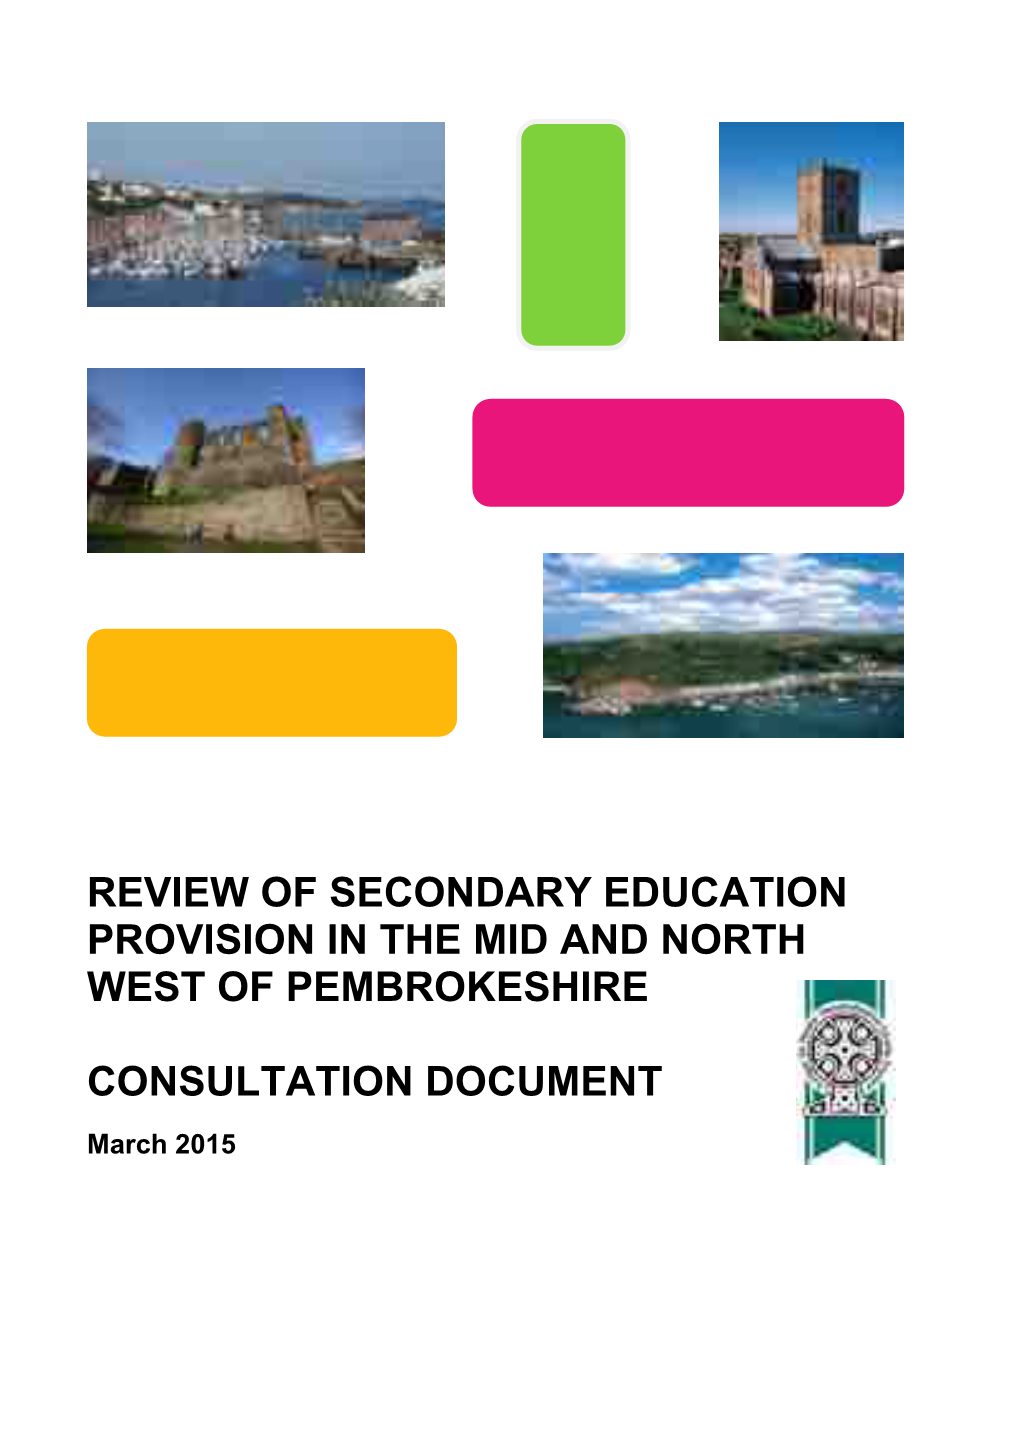 Review of Secondary Education Provision in the Mid and North West of Pembrokeshire